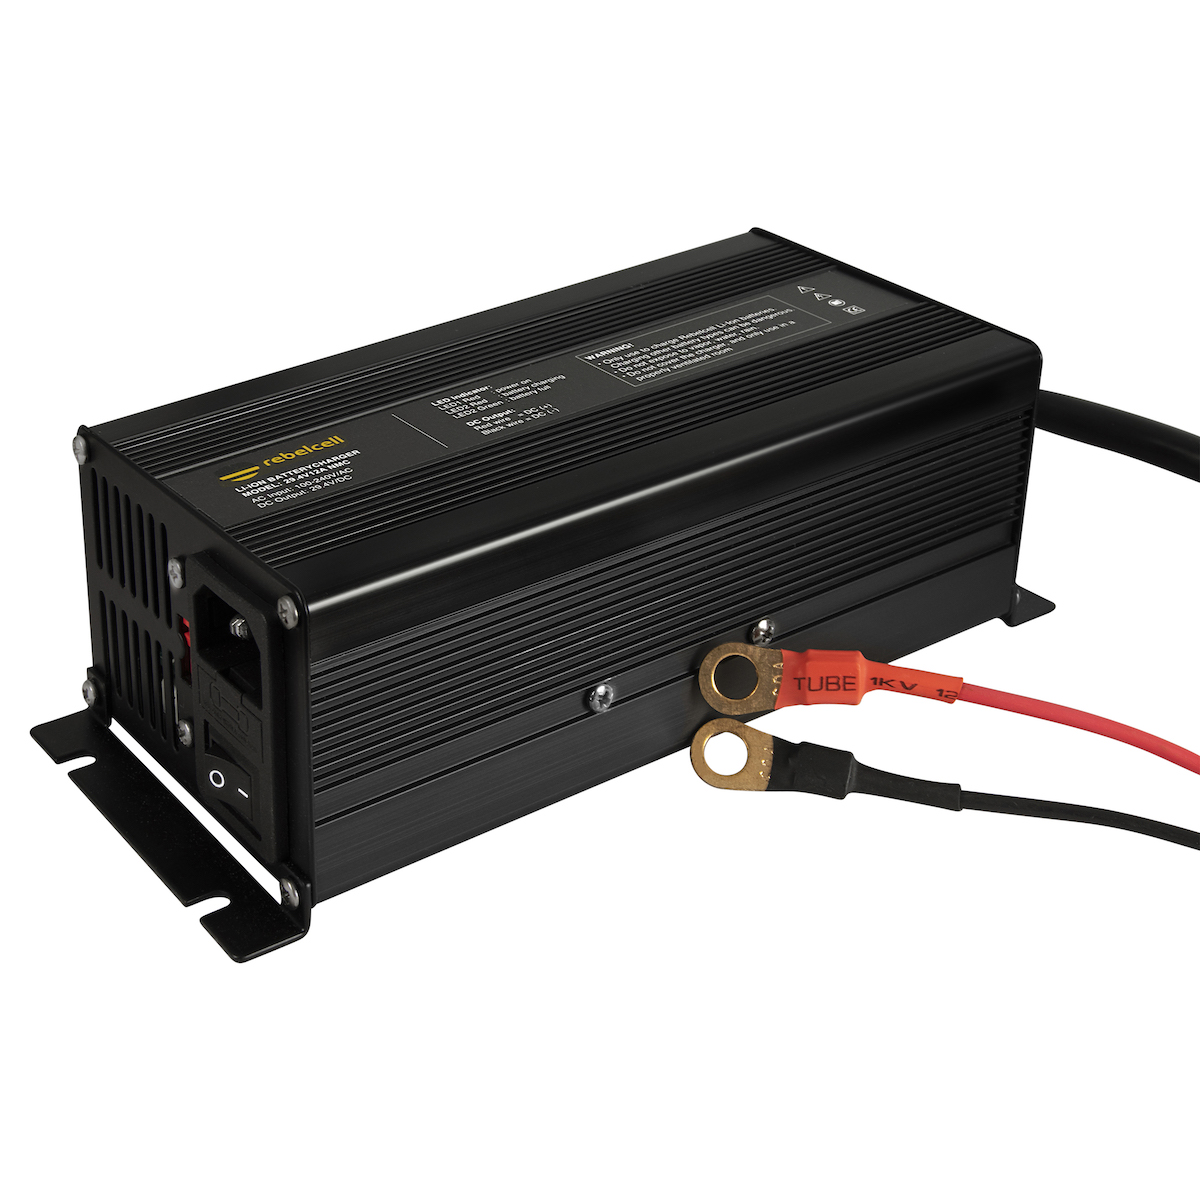 Rebelcell charger 29.4V12A product image